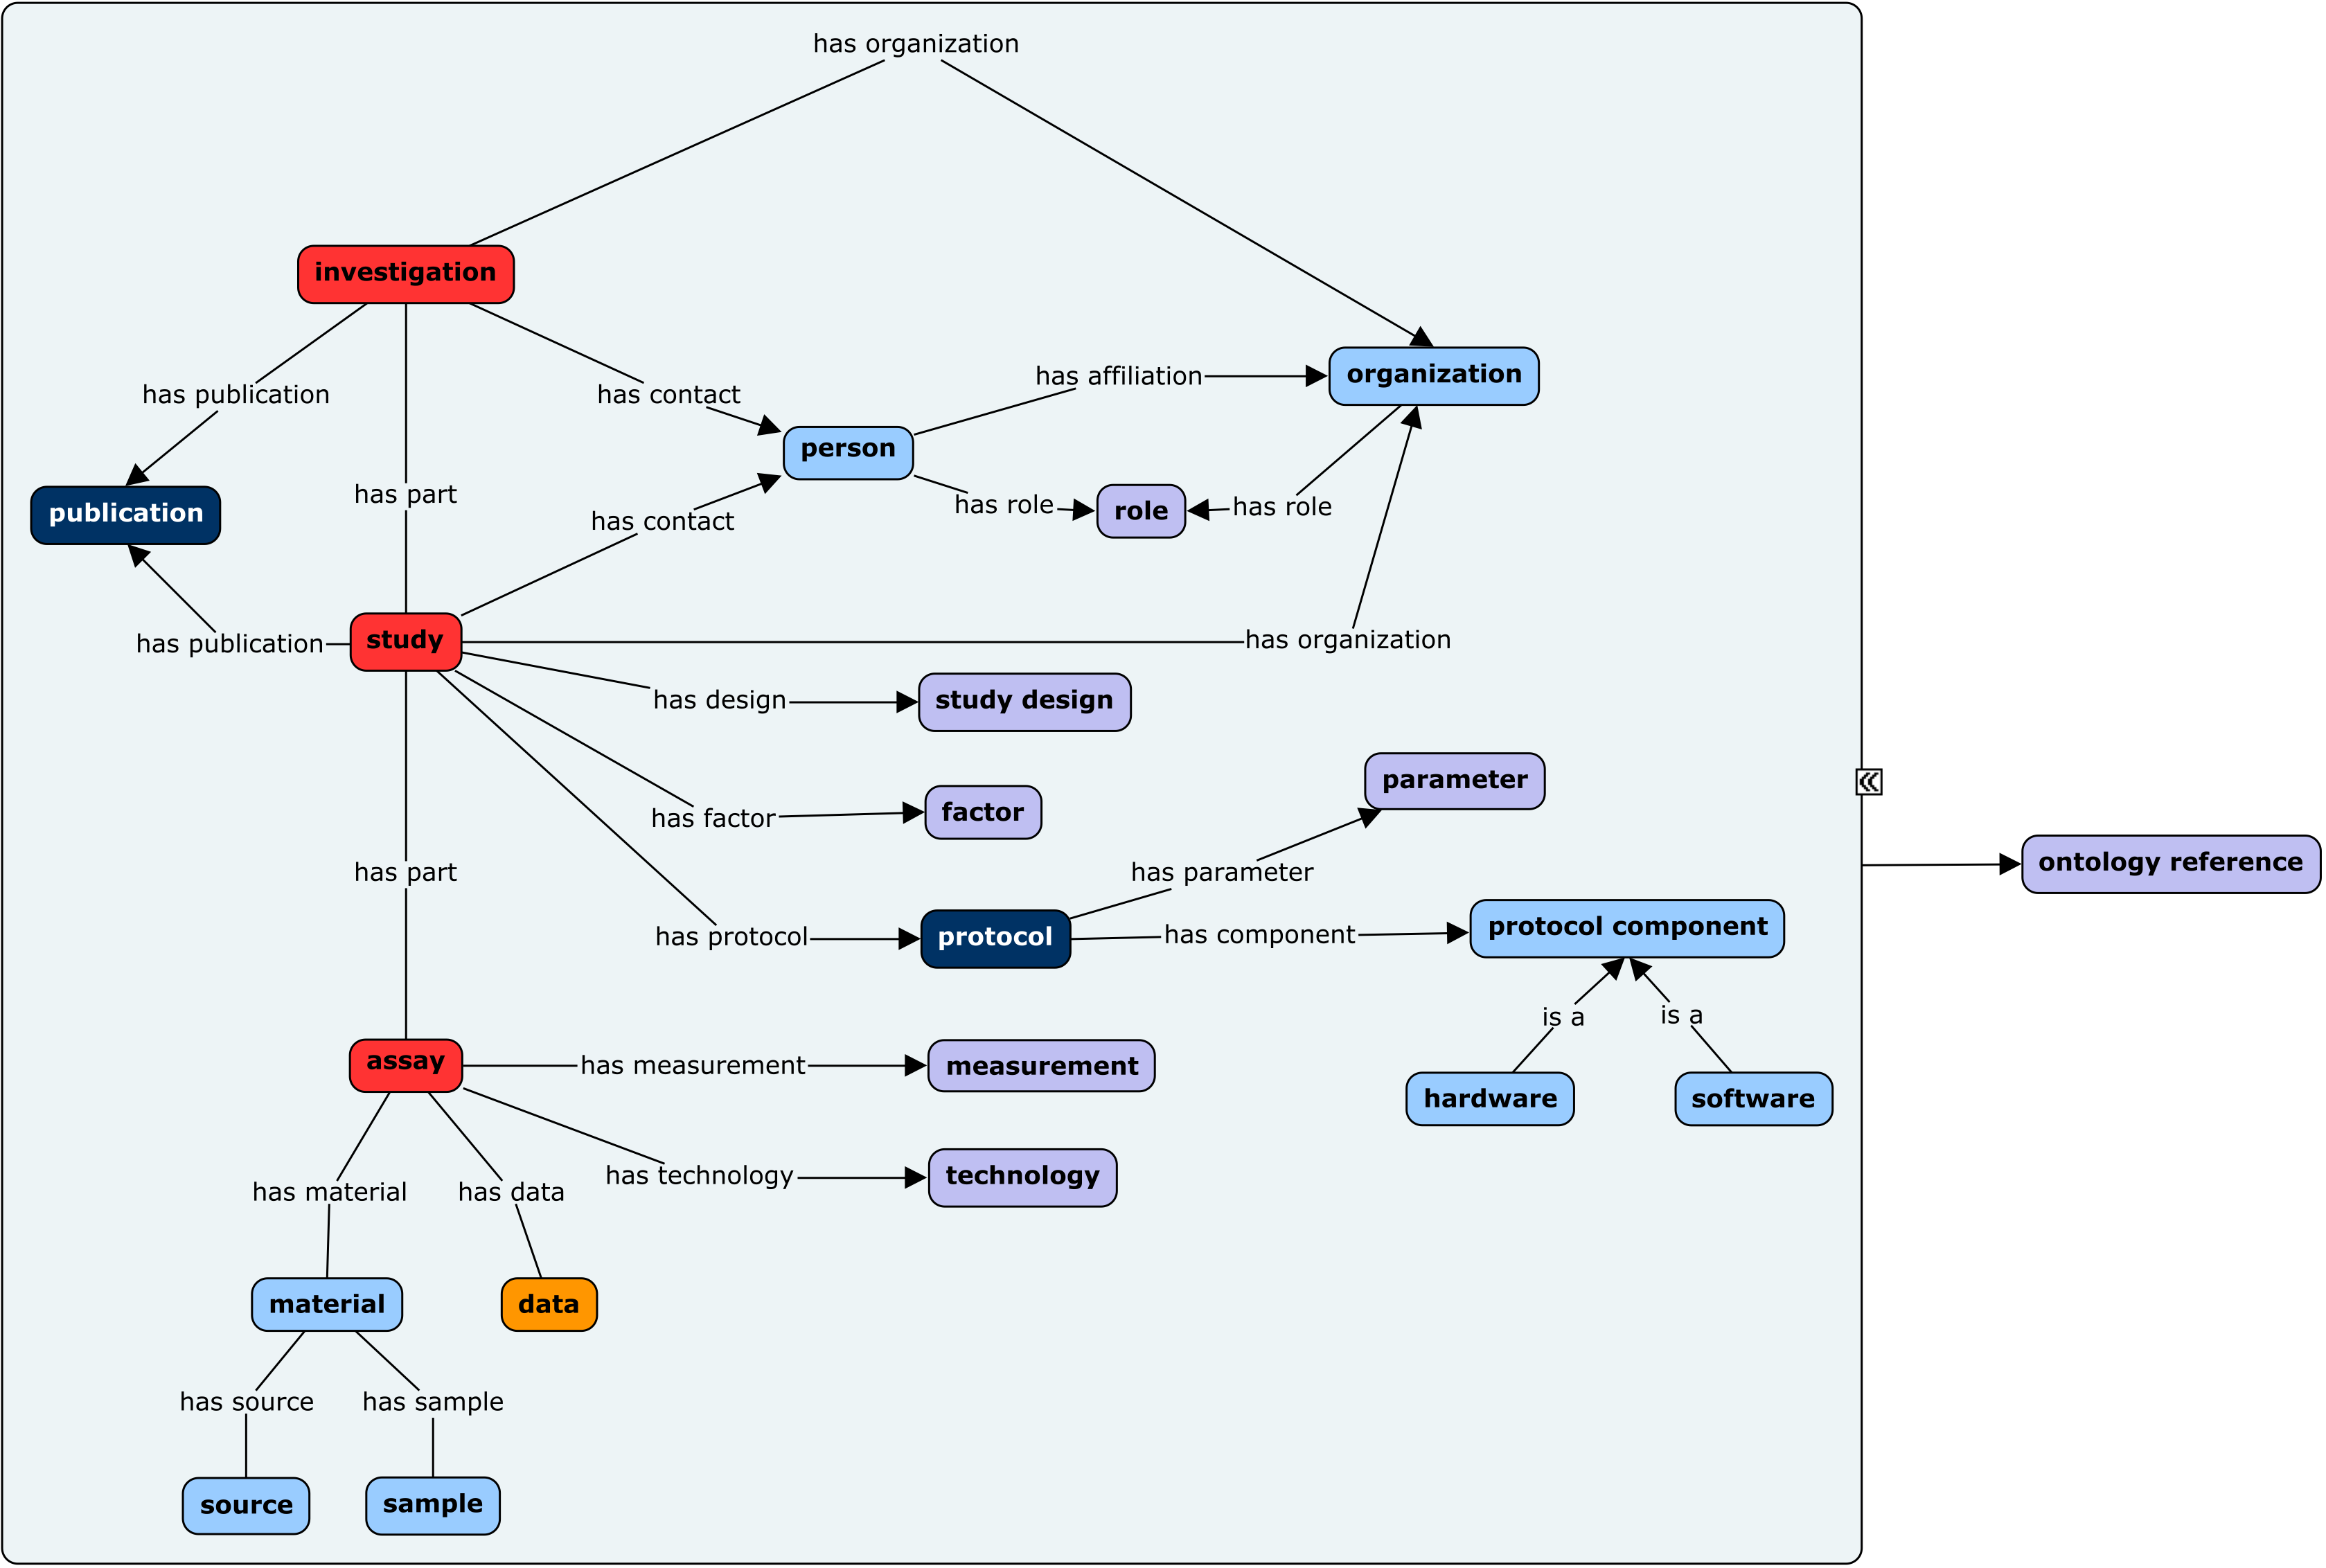 Concept map showing ISA objects/entities and their relationships.